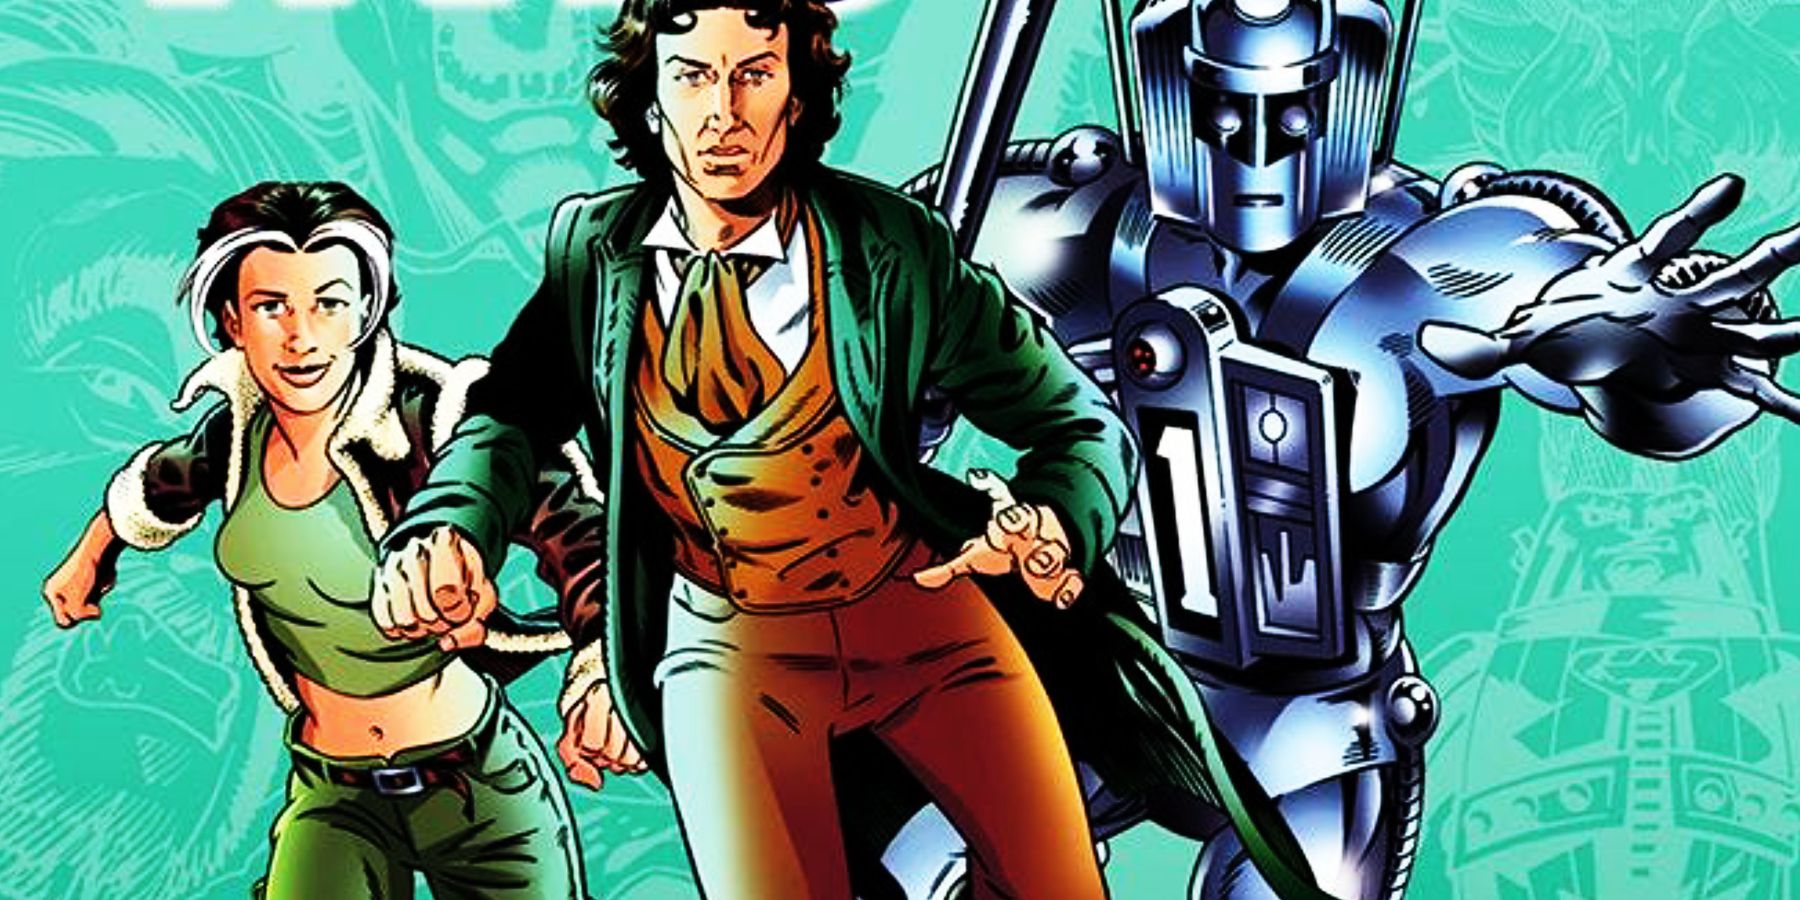 Izzy, the Doctor and Kroton the Cyberman in DWM